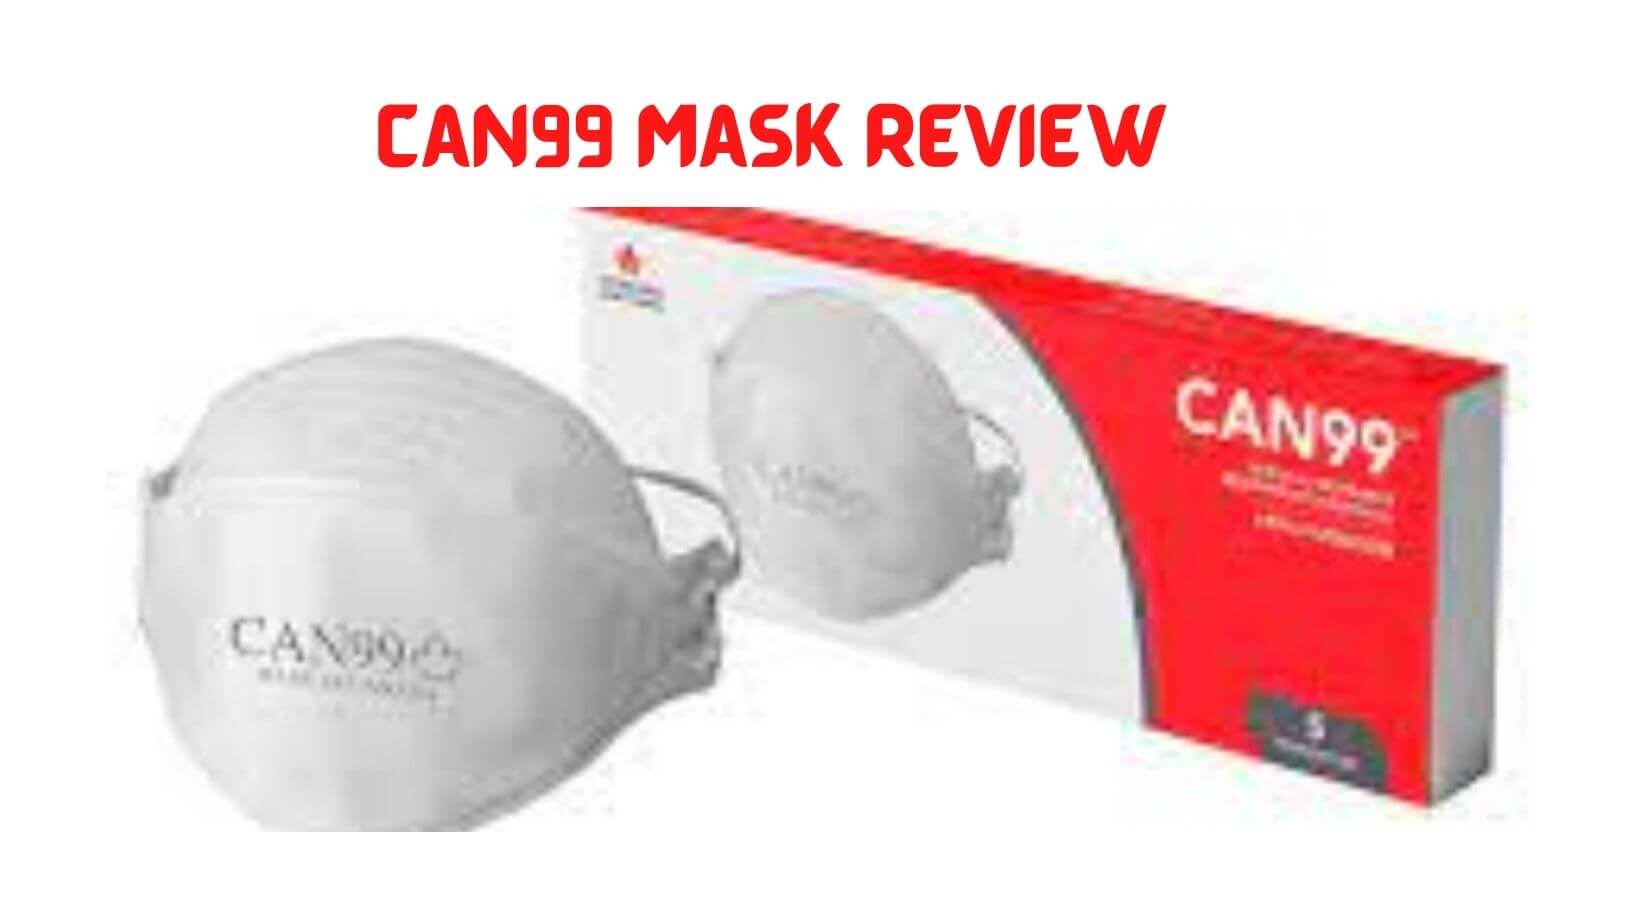 3Can99 Mask Review